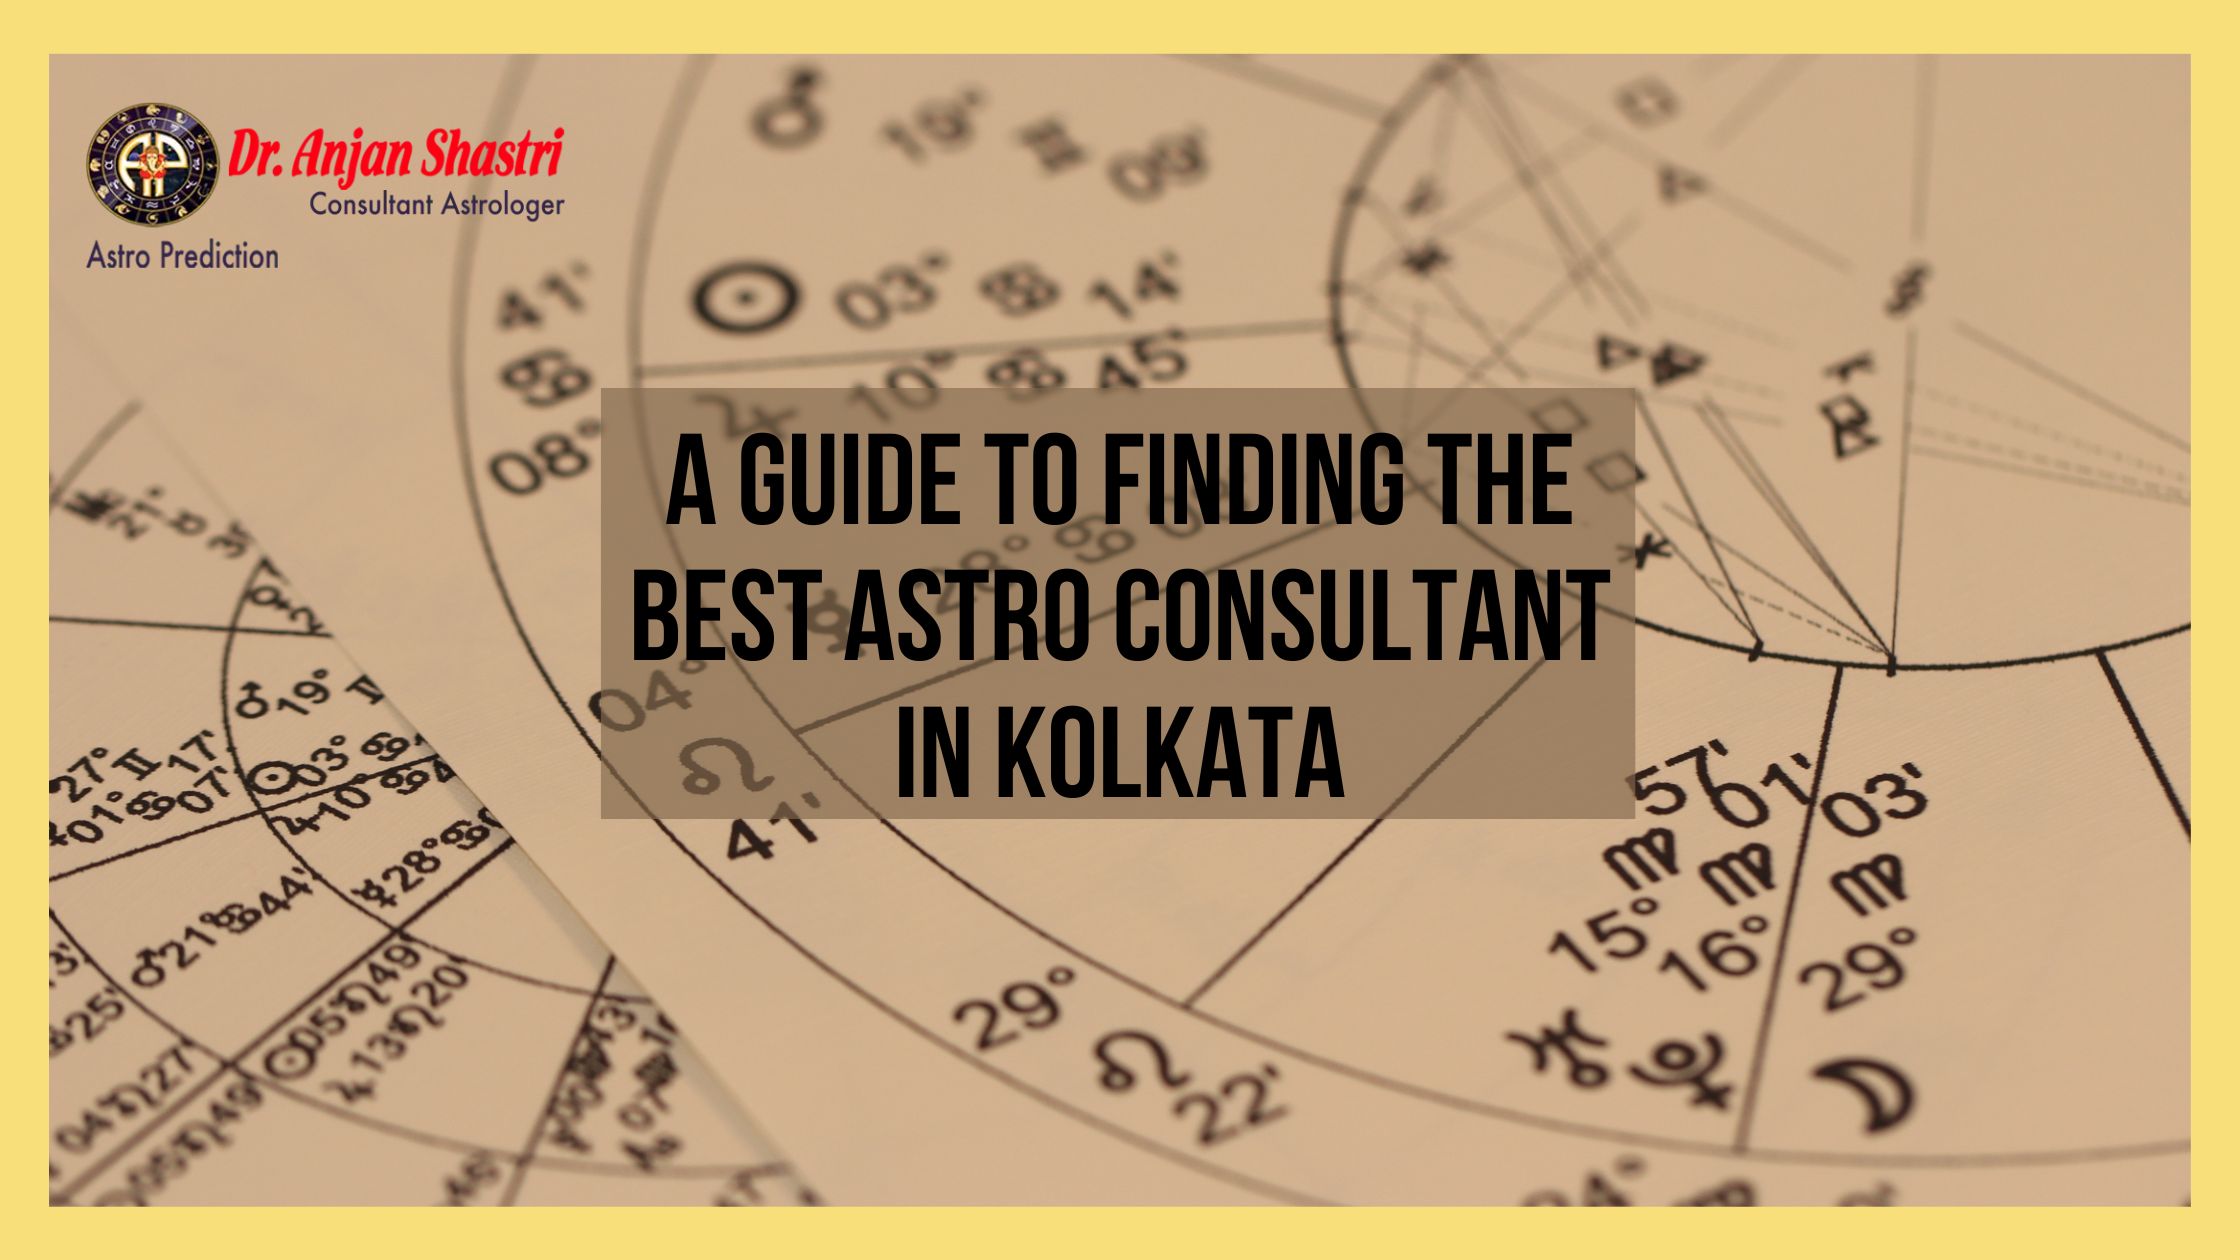 A Guide to Finding the Best Astro Consultant in Kolkata